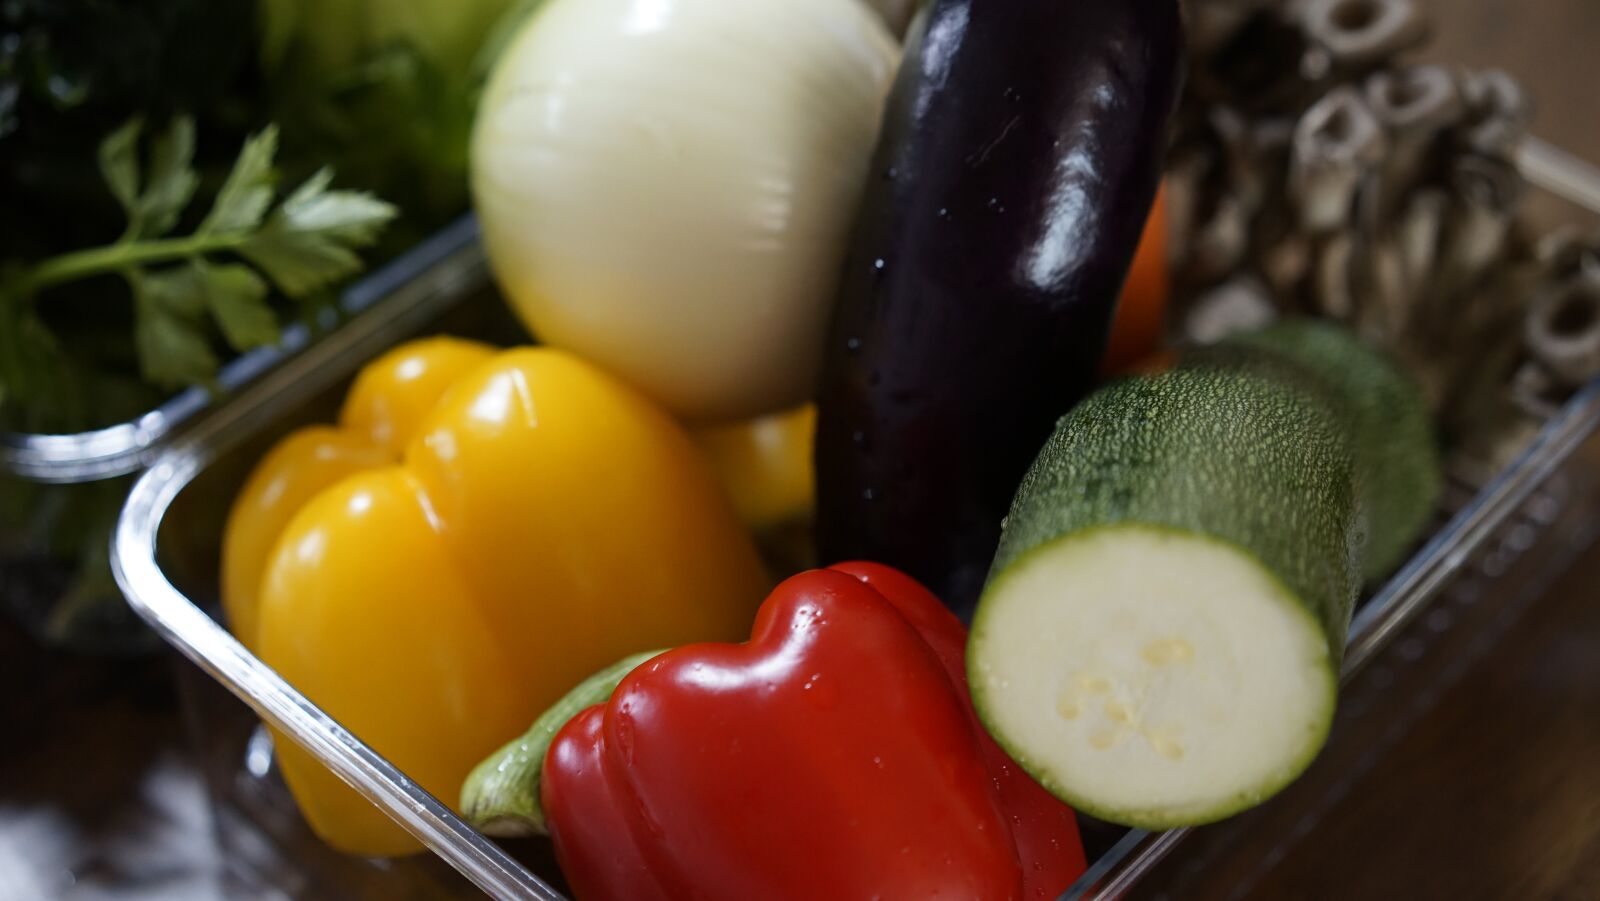 Sony a7R sample photo. Vegetable, blood, eggplant photography